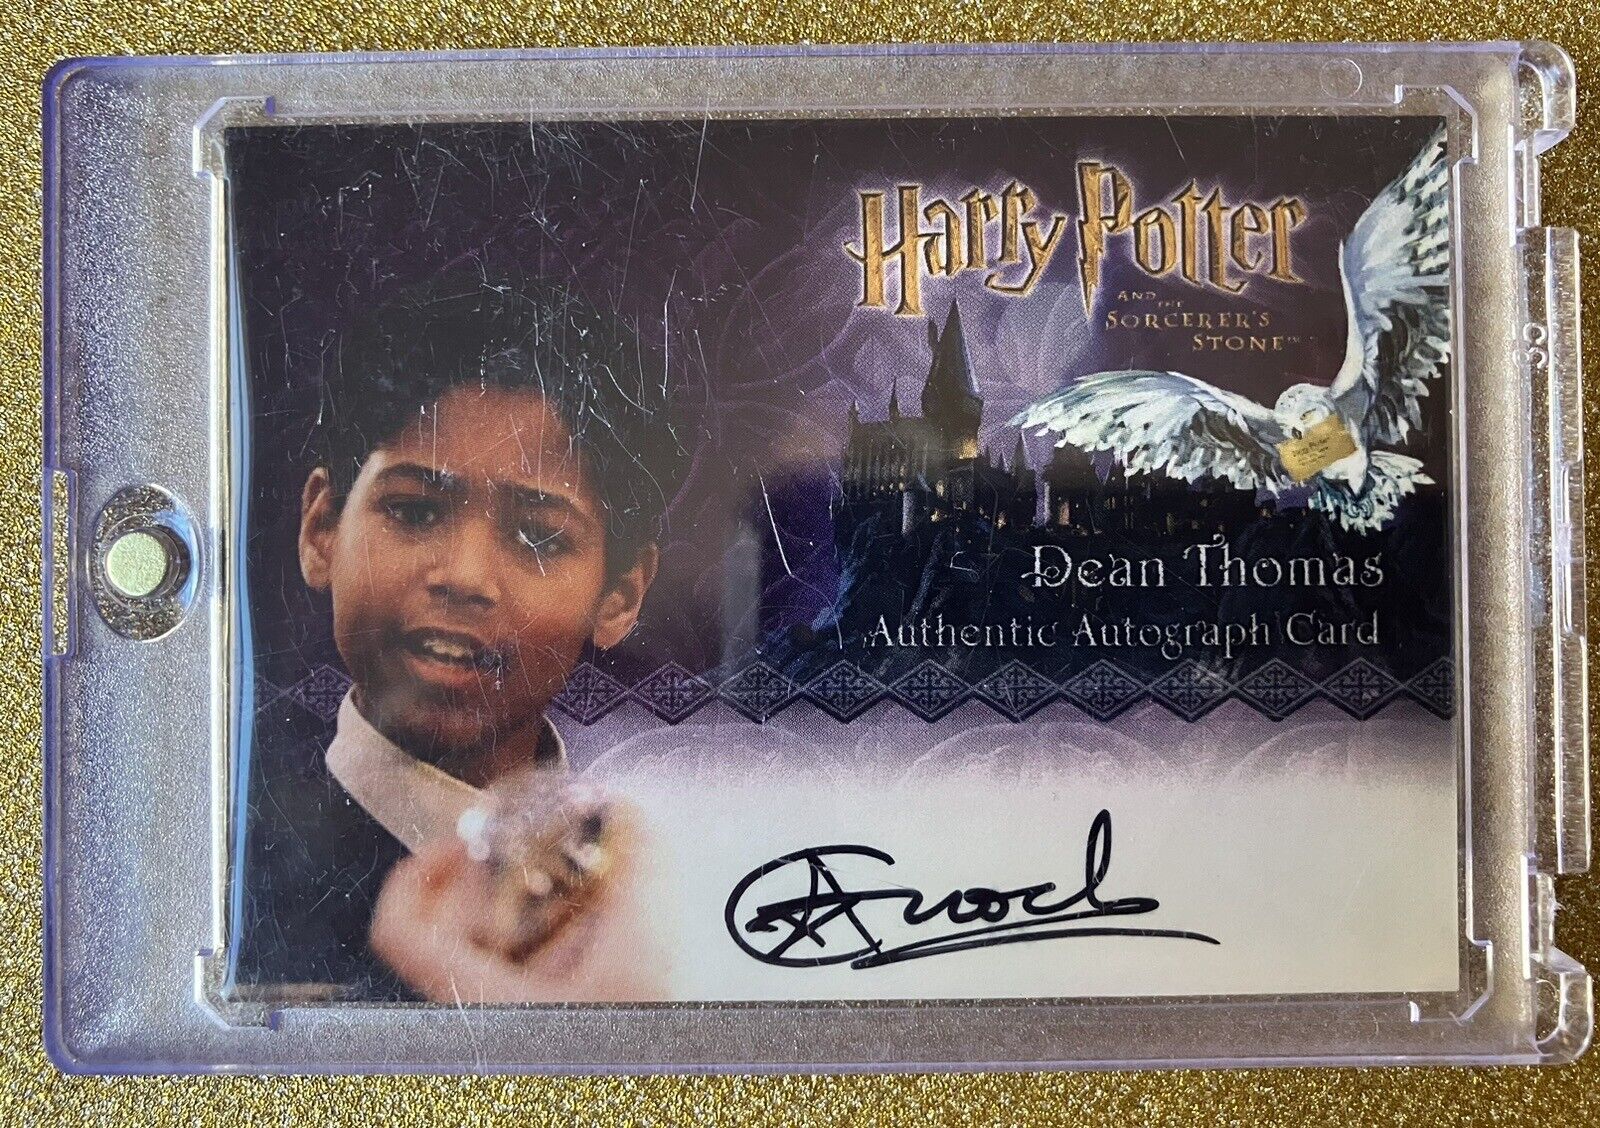 Harry Potter Sorcerer\'s Stone Alfred Enoch as Dean Thomas Autograph Card